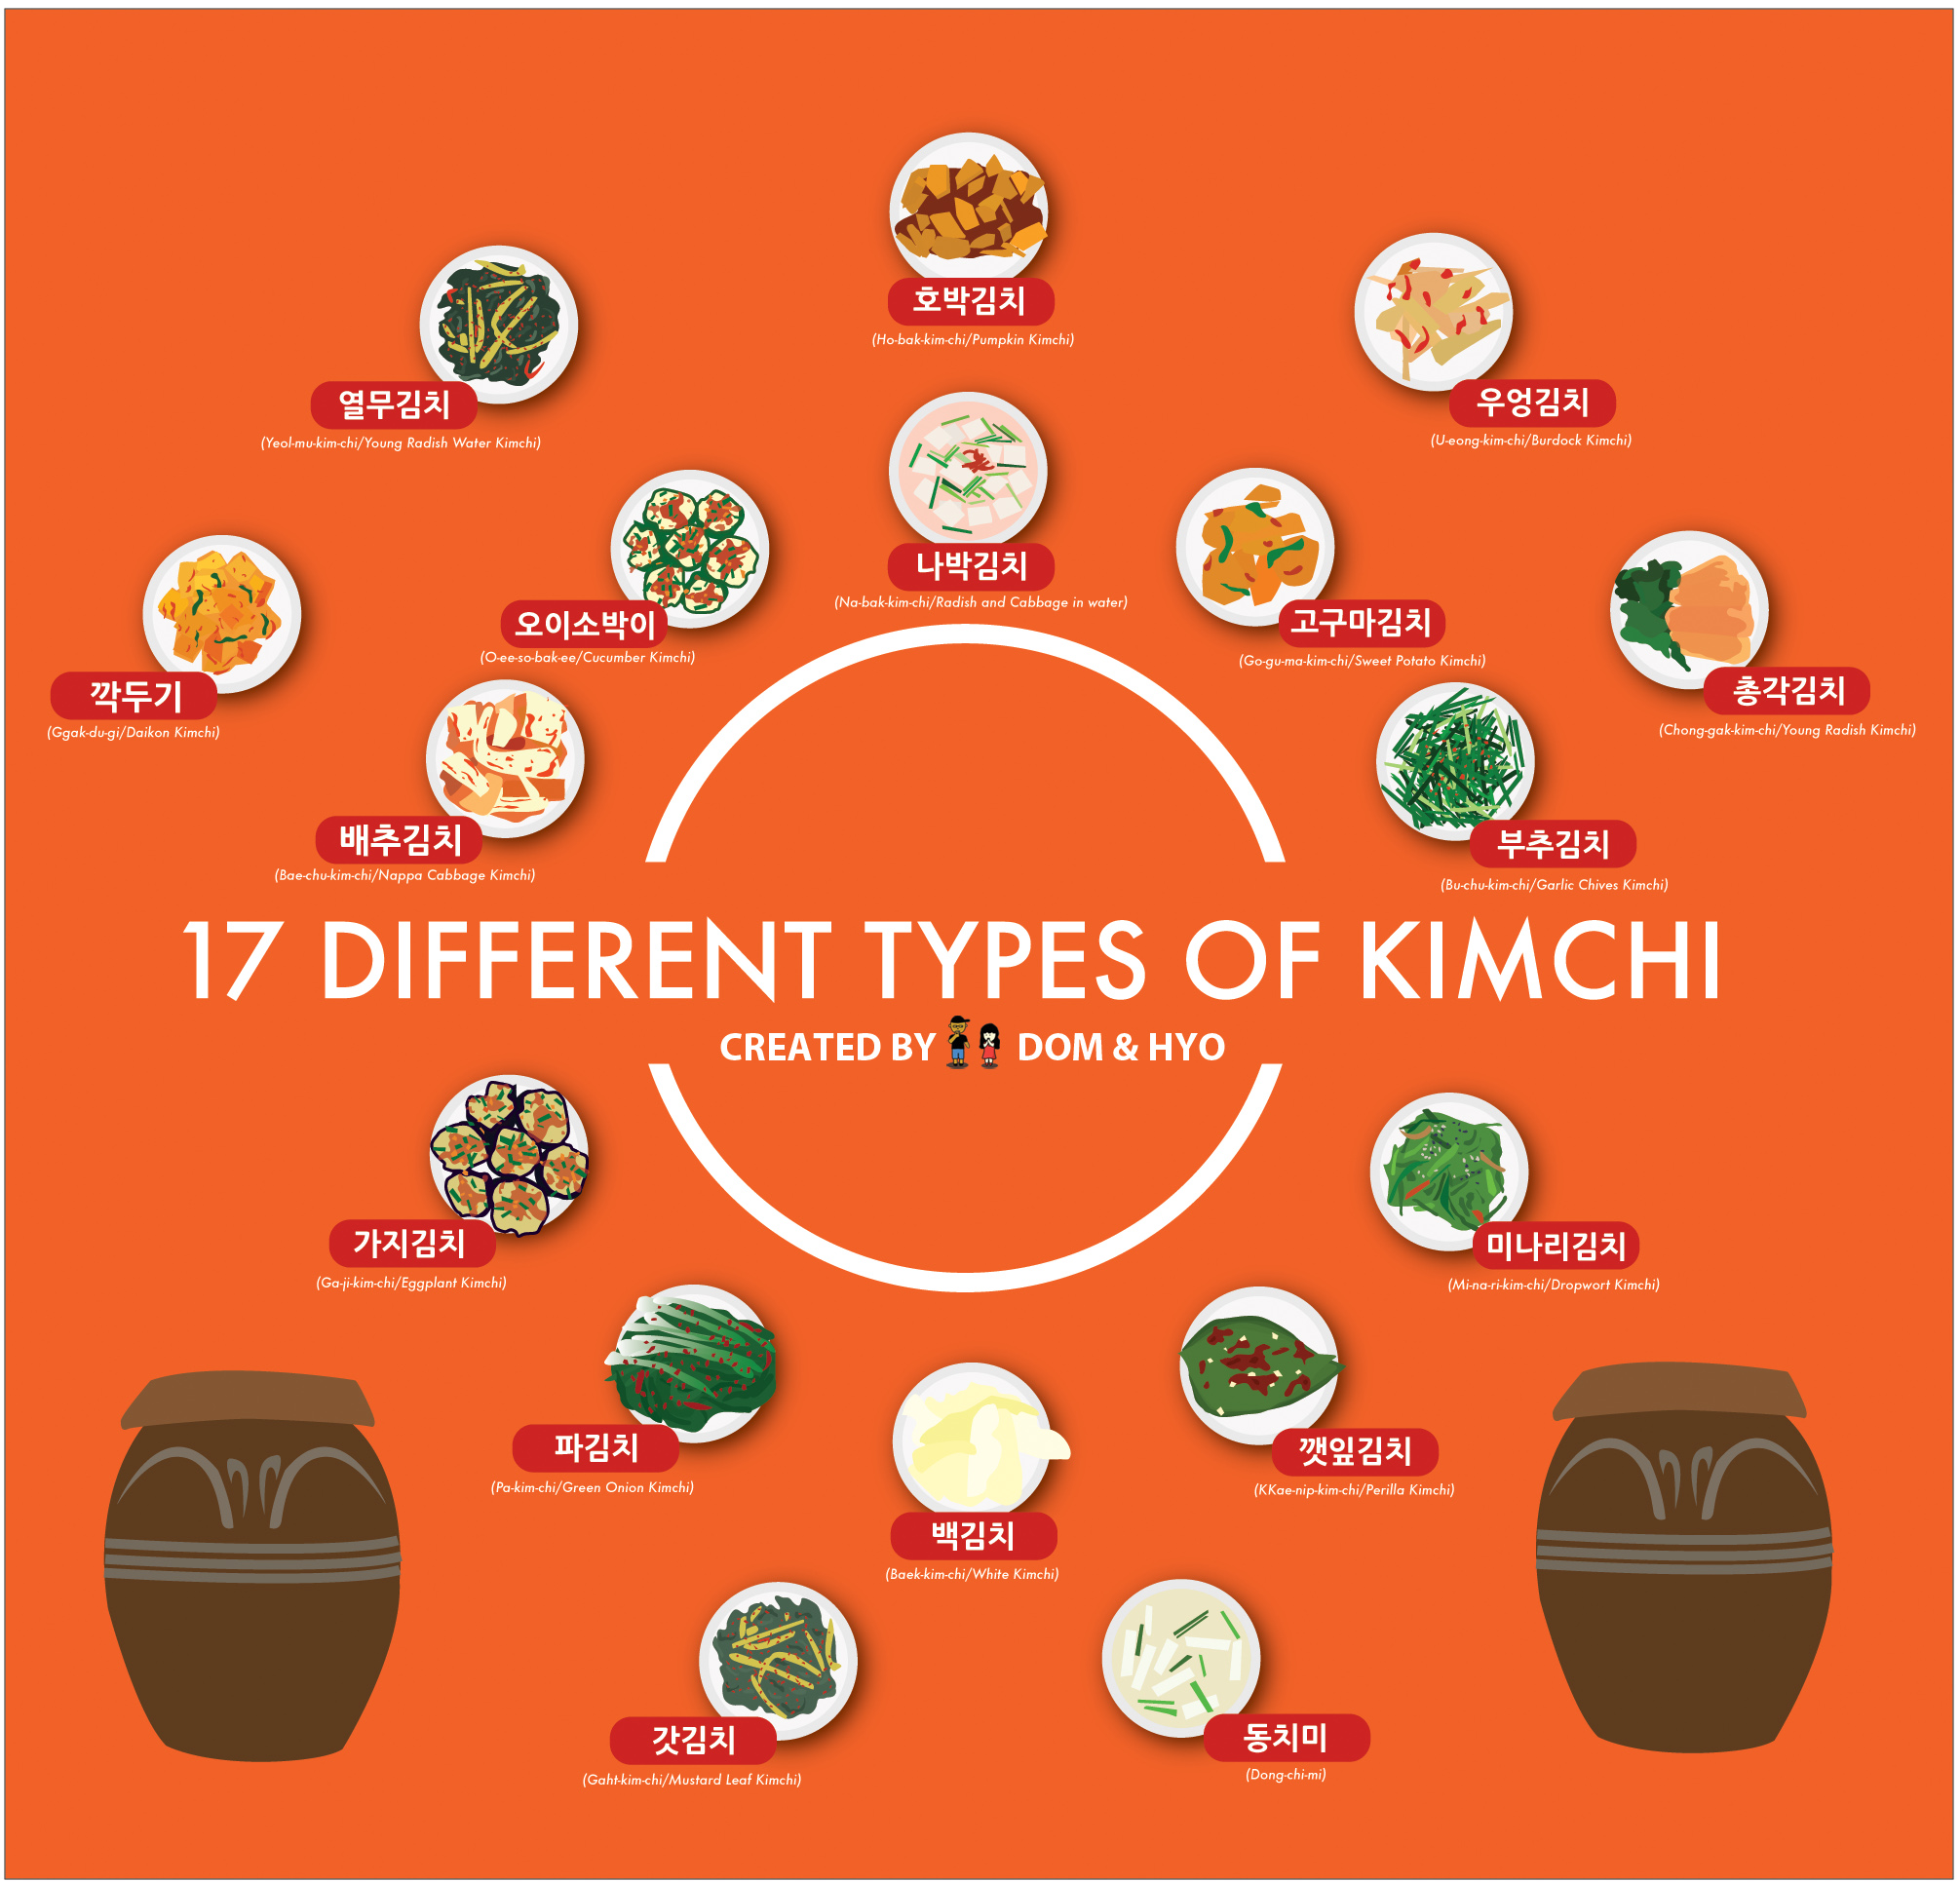 17 different types of kimchi